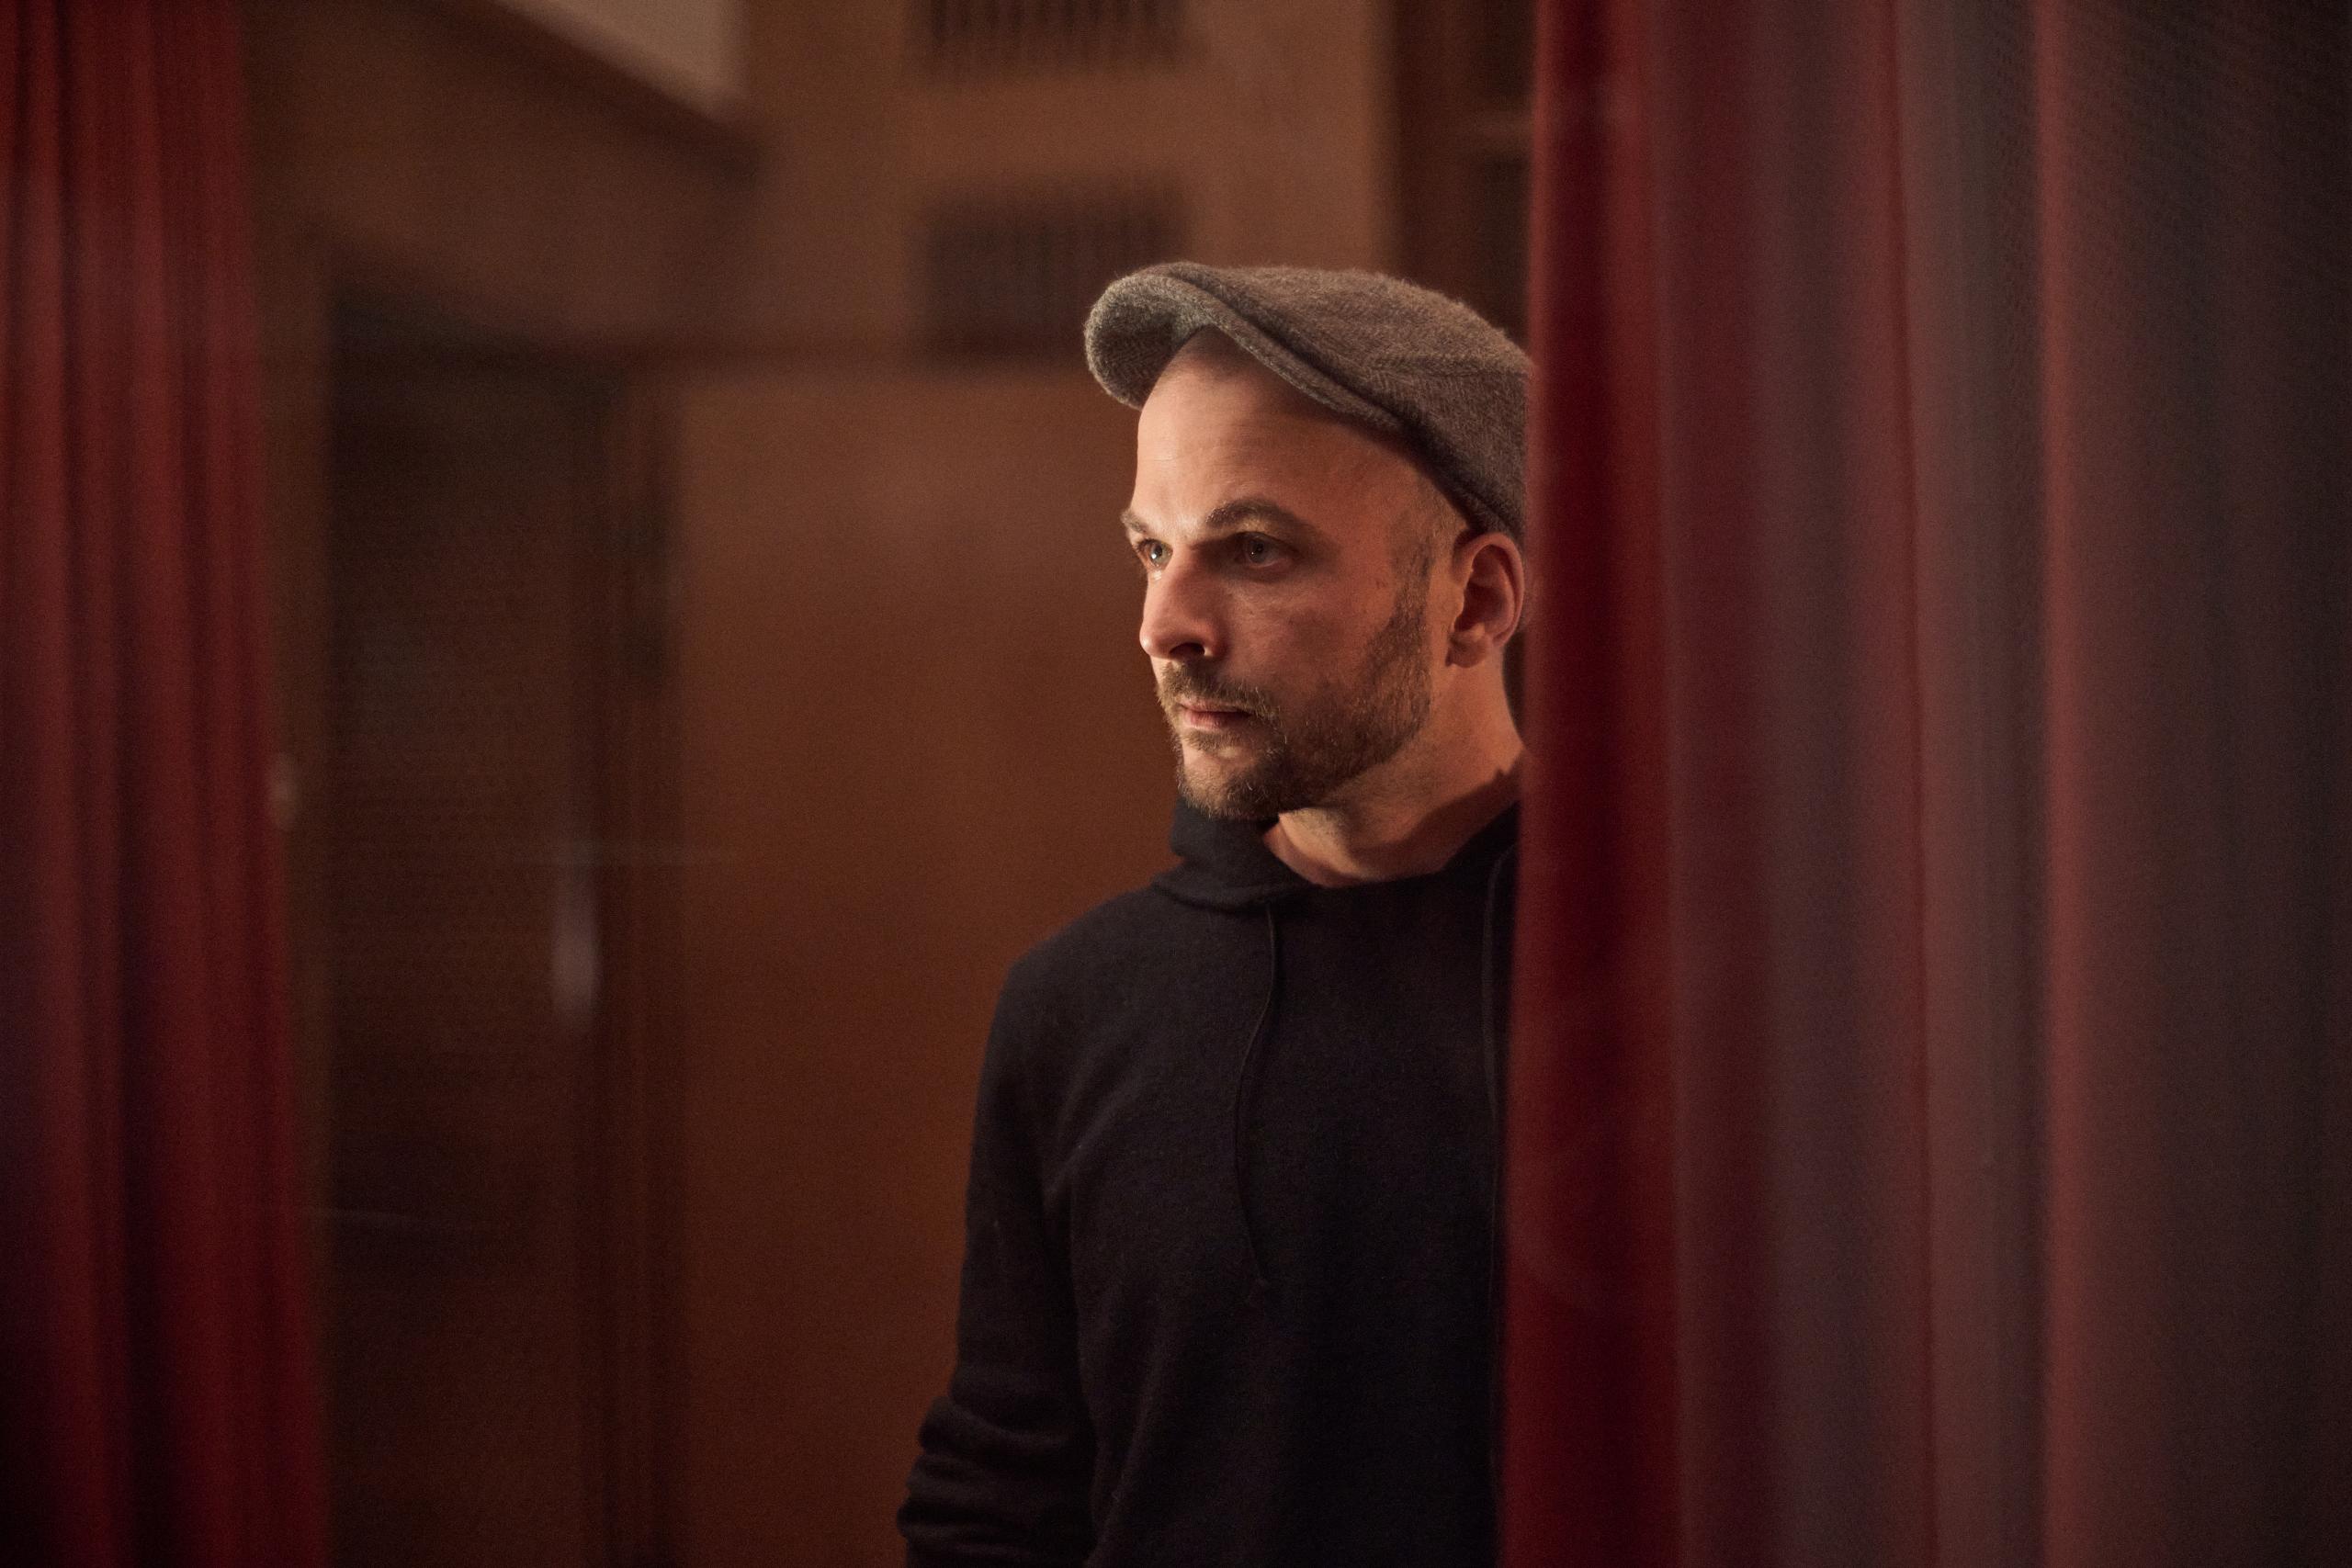 Pianist, composer and producer Nils Frahm